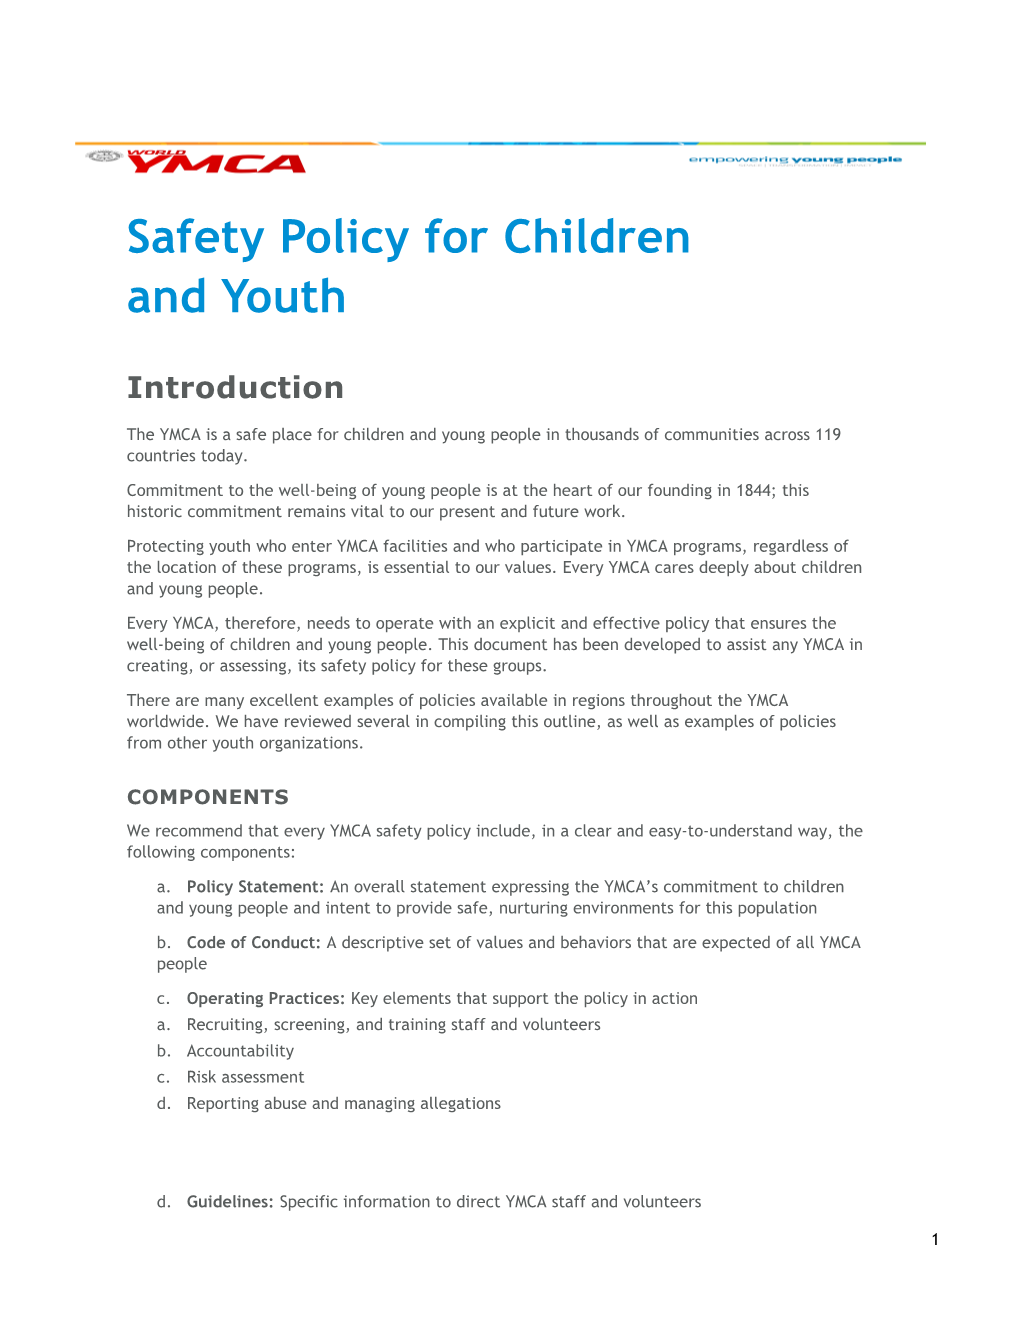 Safety Policy for Children and Youth